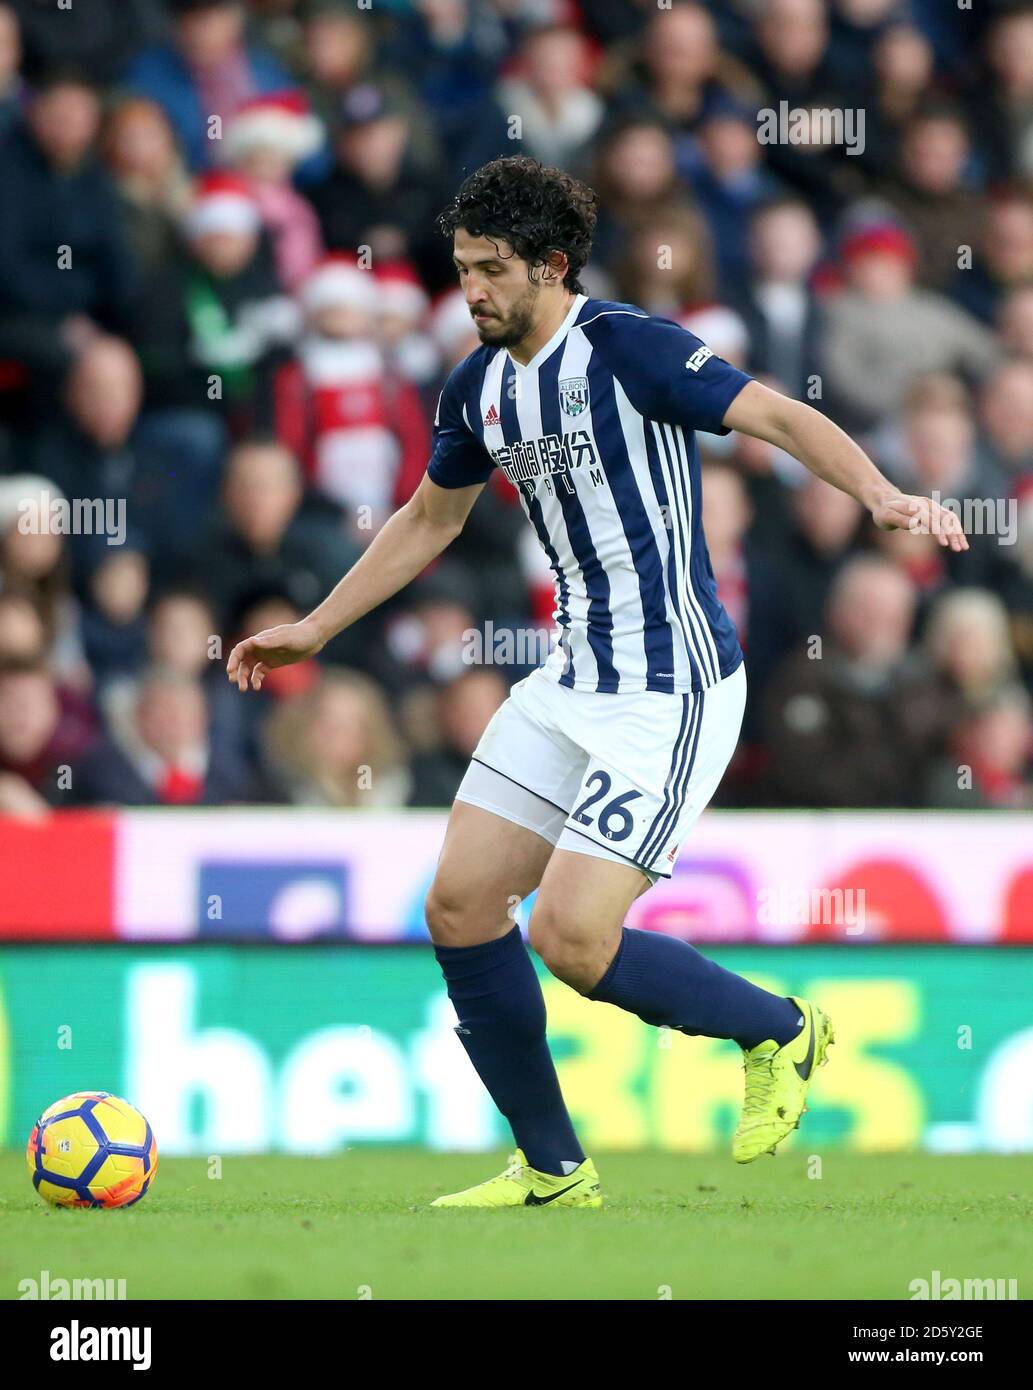 West Bromwich Albion's Ahmed Hegazy Stock Photo